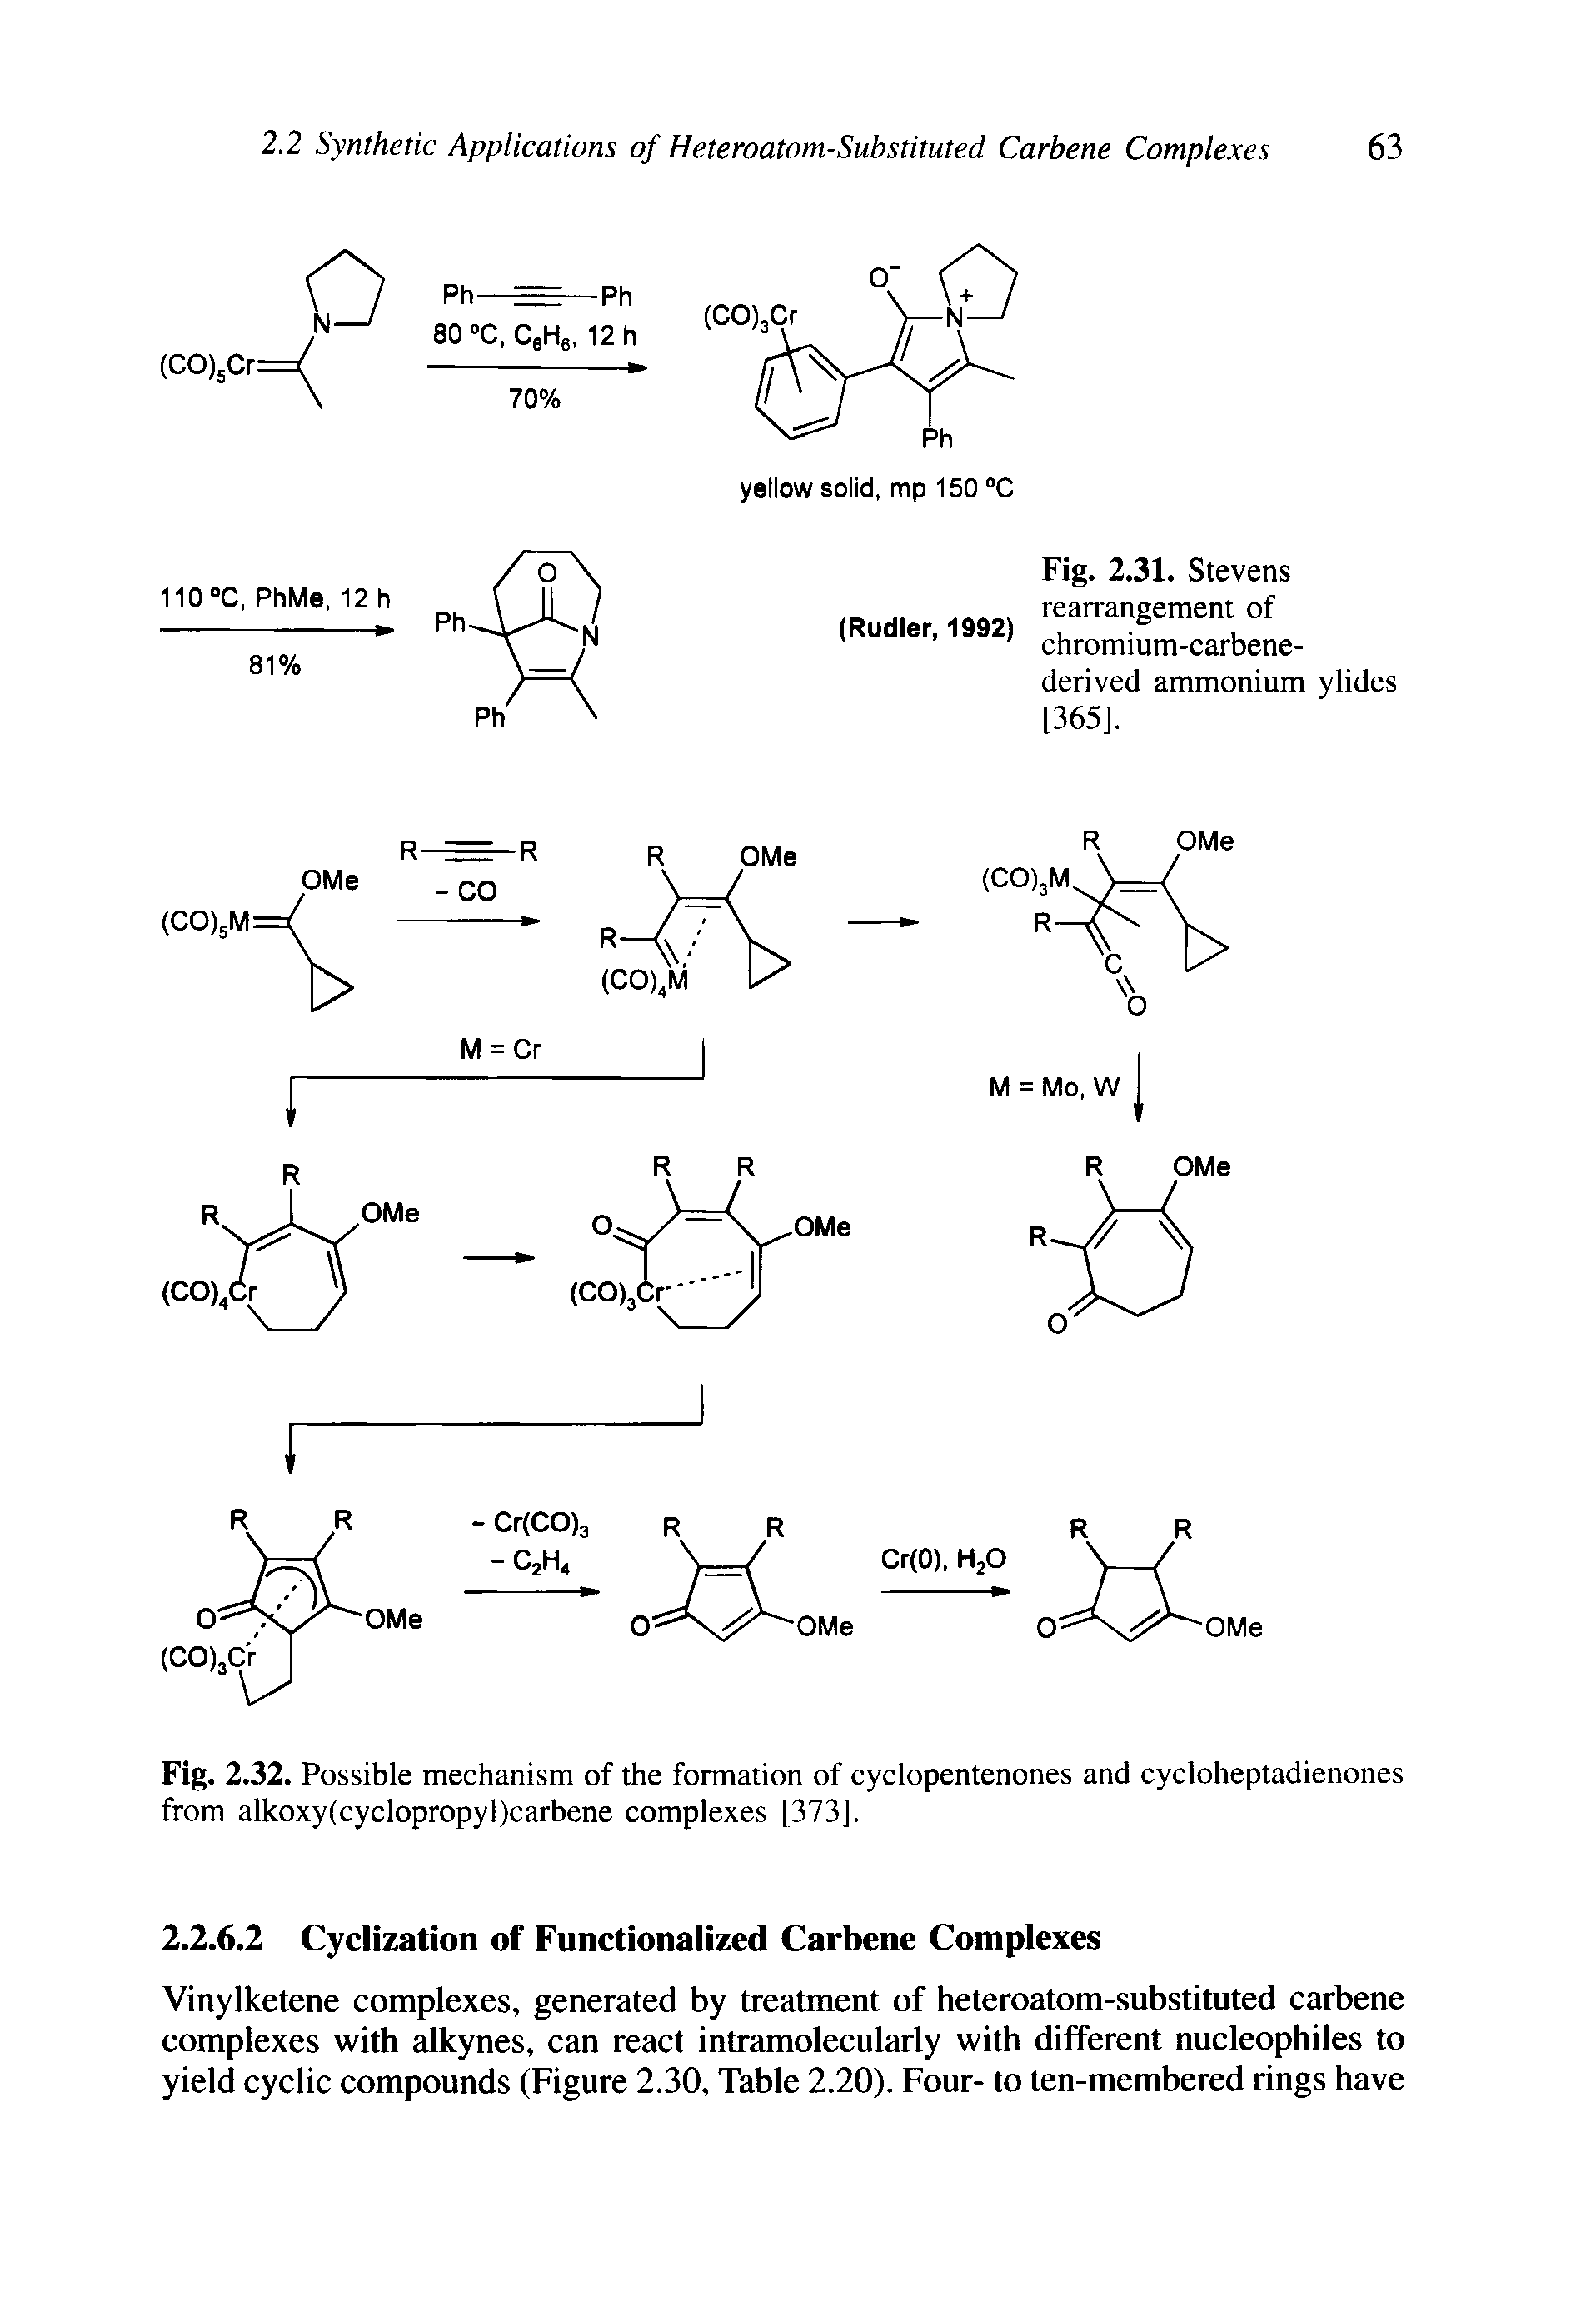 Fig. 2.32. Possible mechanism of the formation of cyclopentenones and cycloheptadienones from alkoxy(cyclopropyl)carbene complexes [373],...